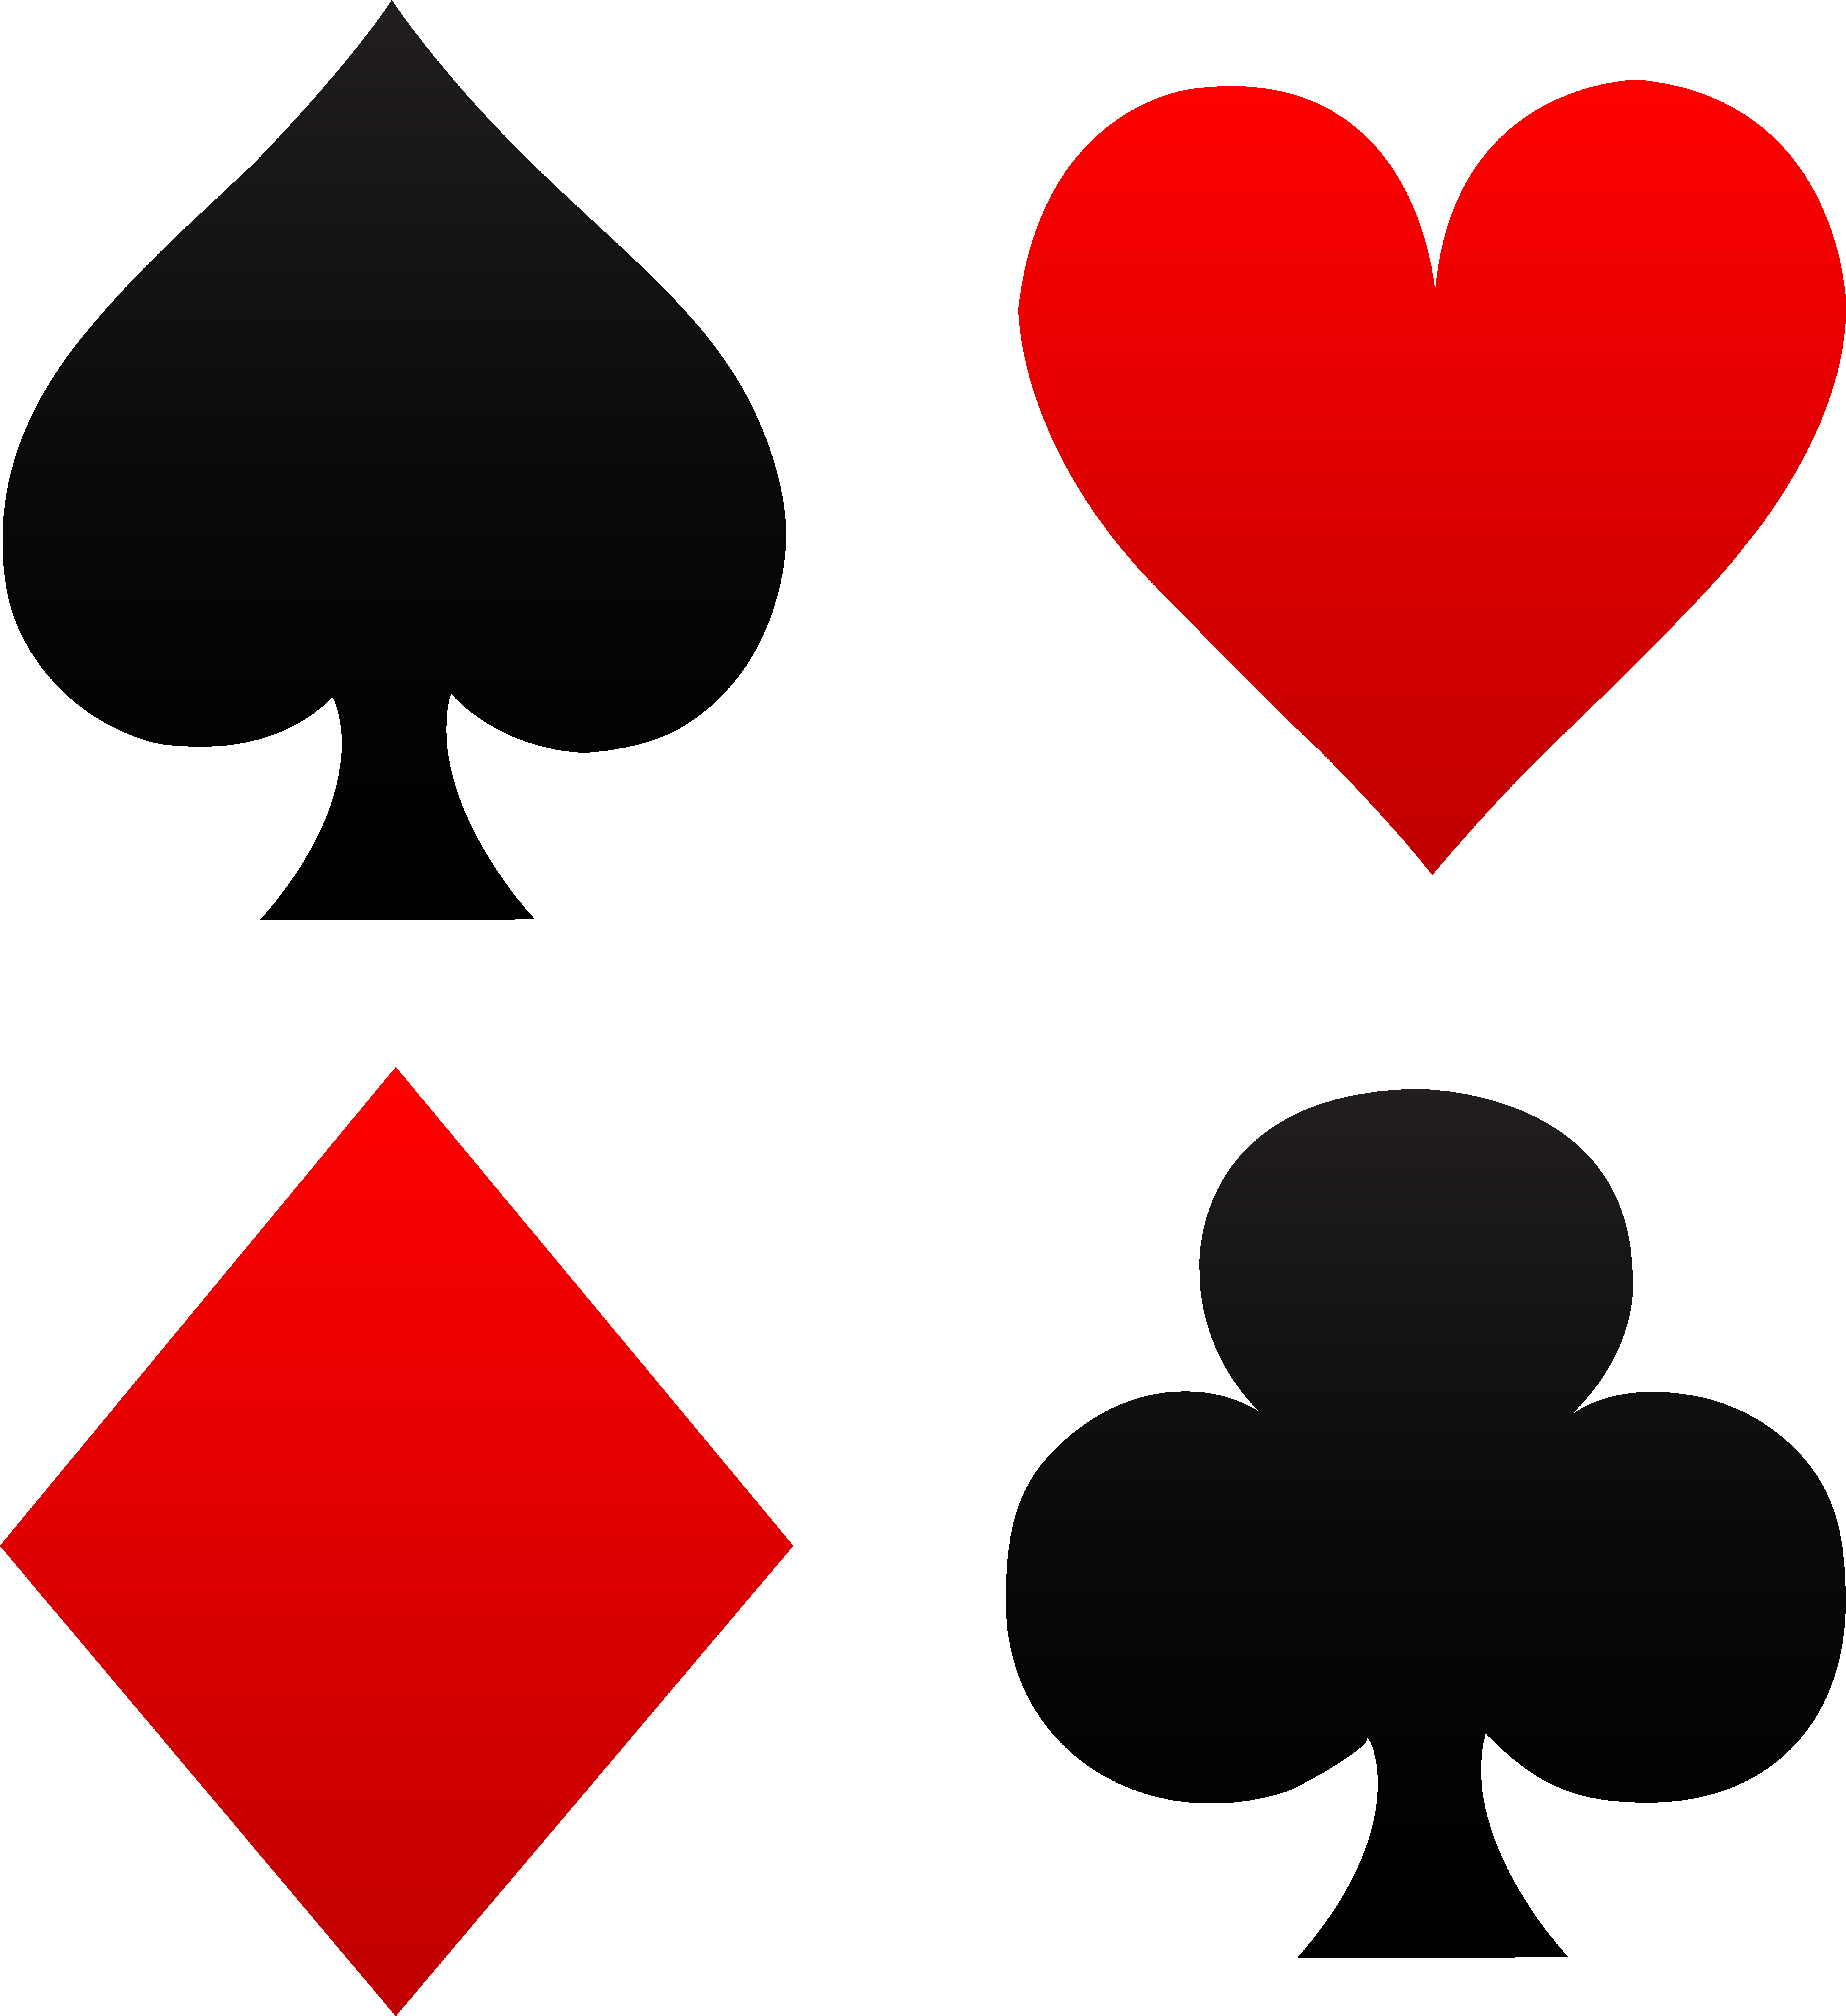 Hearts clipart card. Heart playing cards 